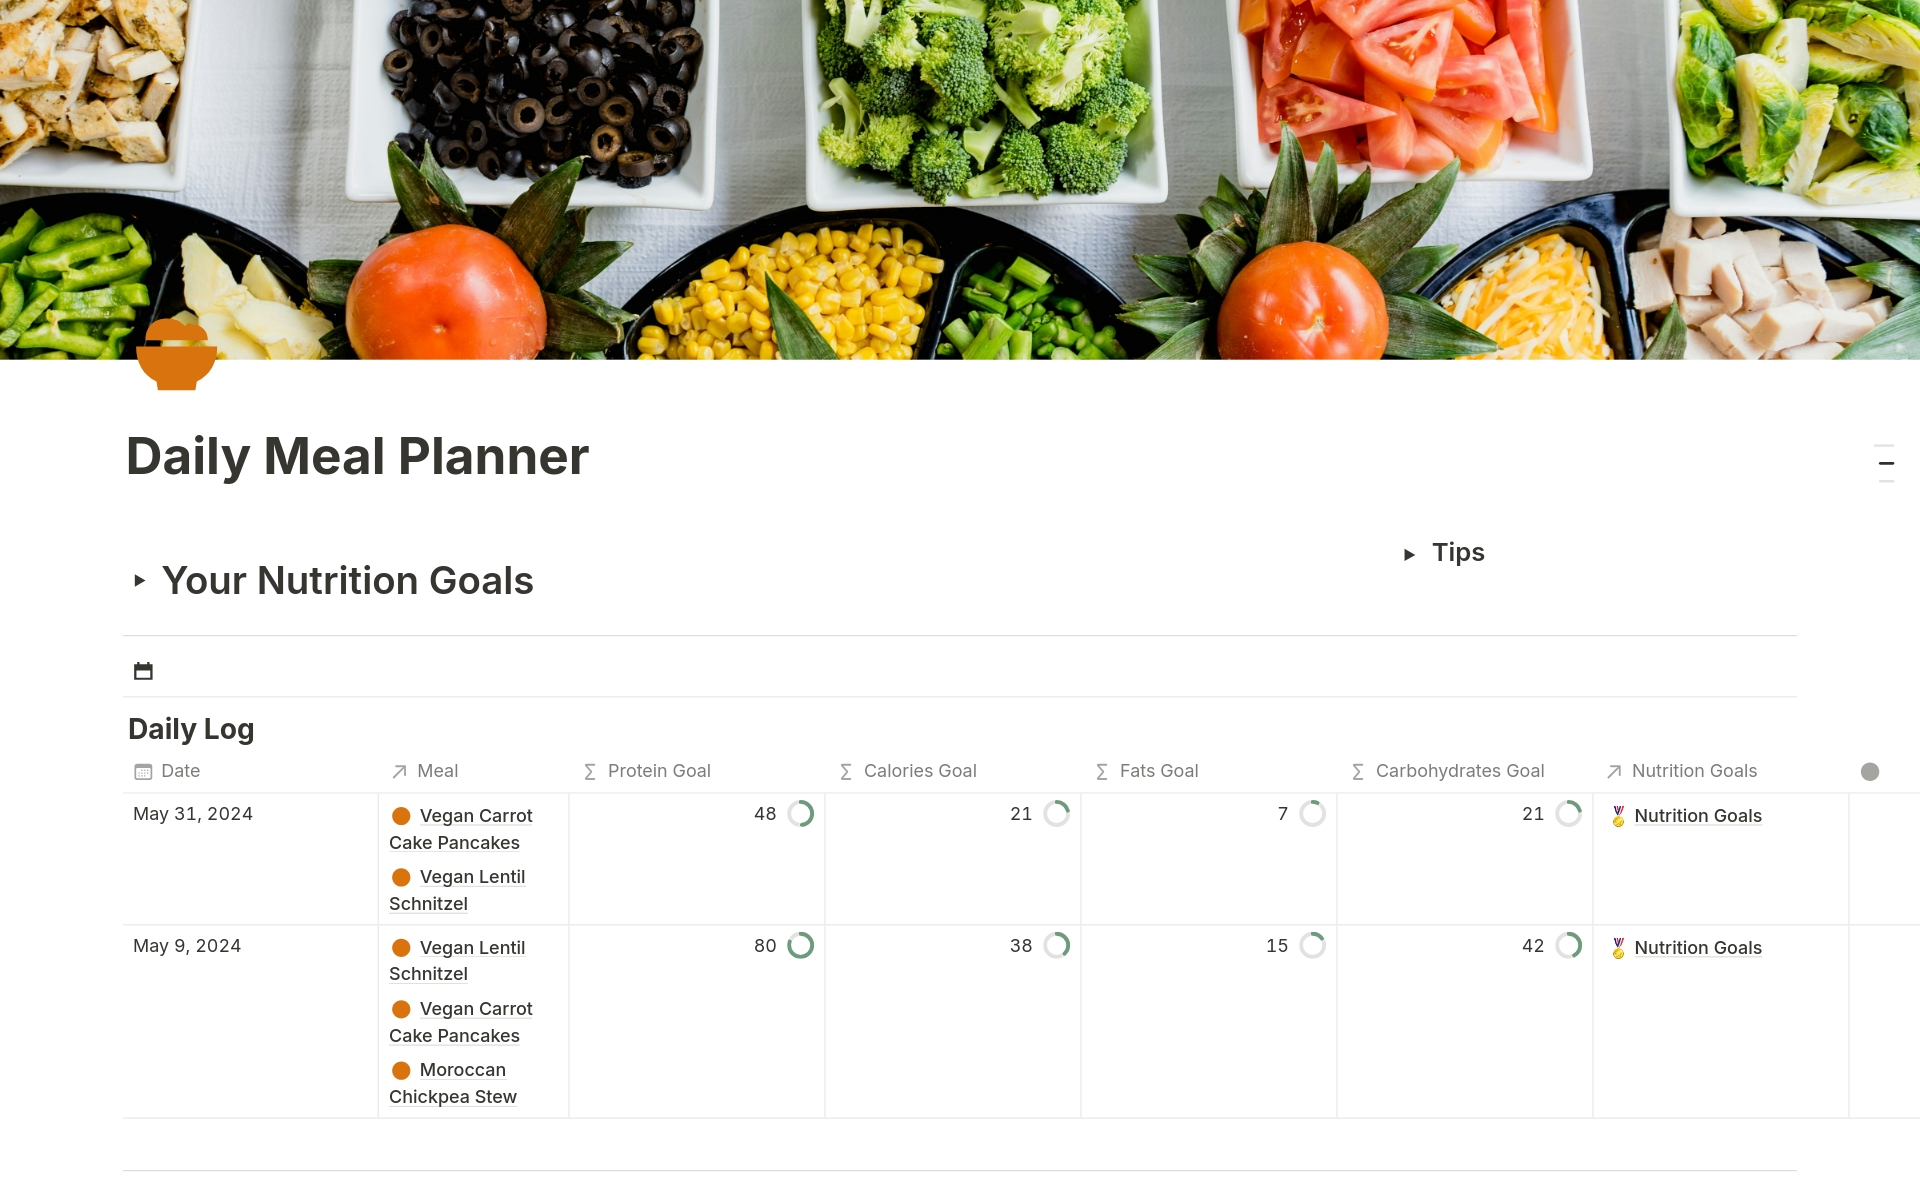 A Daily Meal Planner / Nutrition Tracker